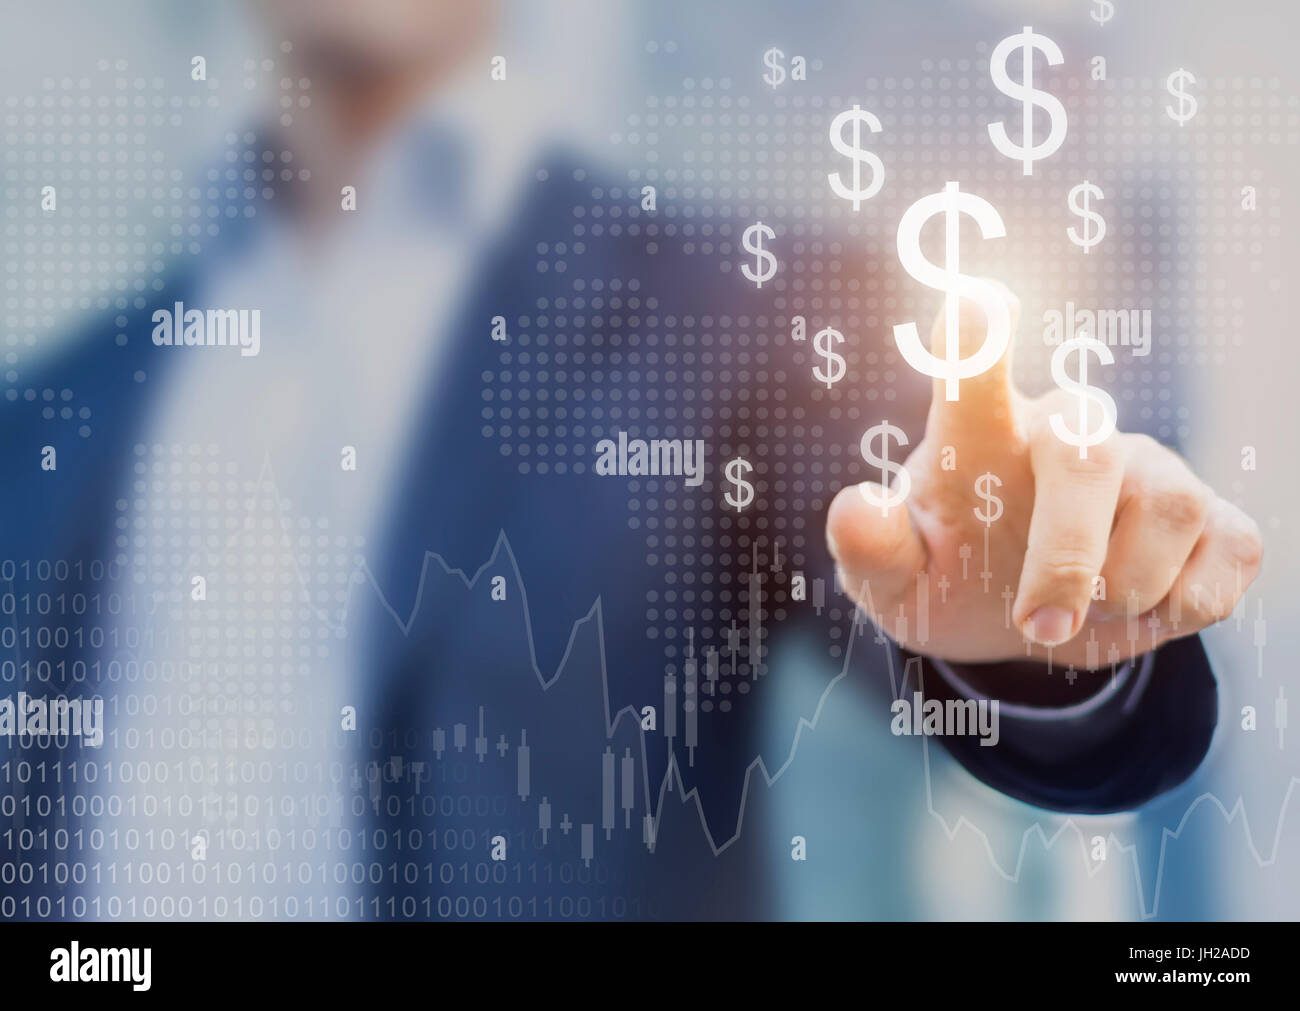 Successful international financial investment concept with business person showing growth, charts and dollar sign, digital technology Stock Photo